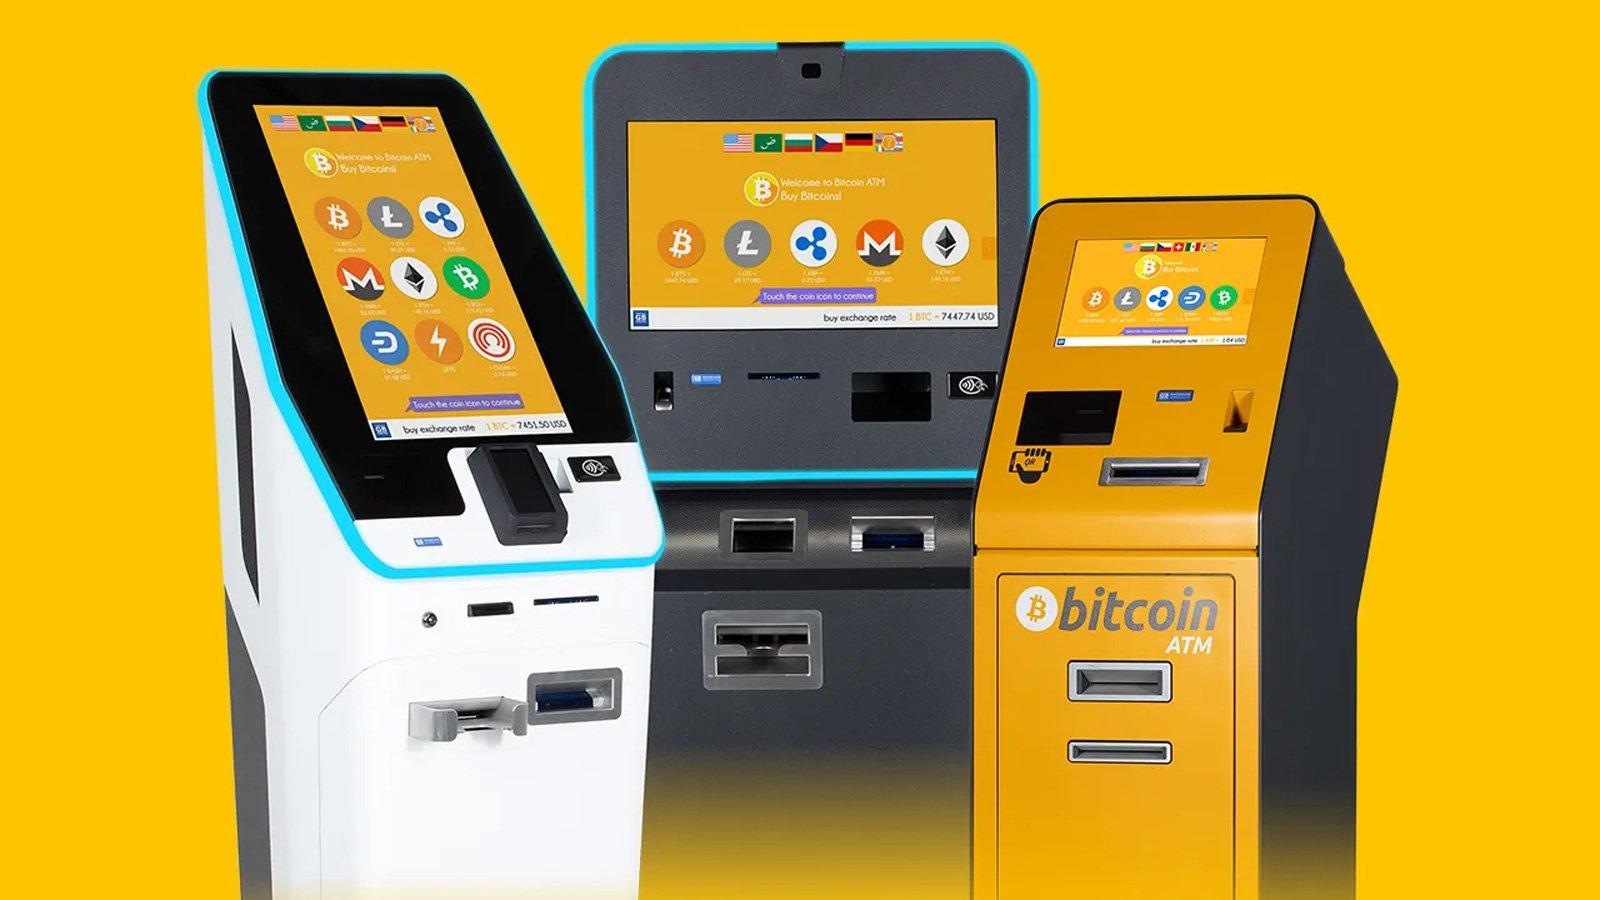 ATM Manufacturer General Bytes Hacked with Over $1.5M in Bitcoin Stolen